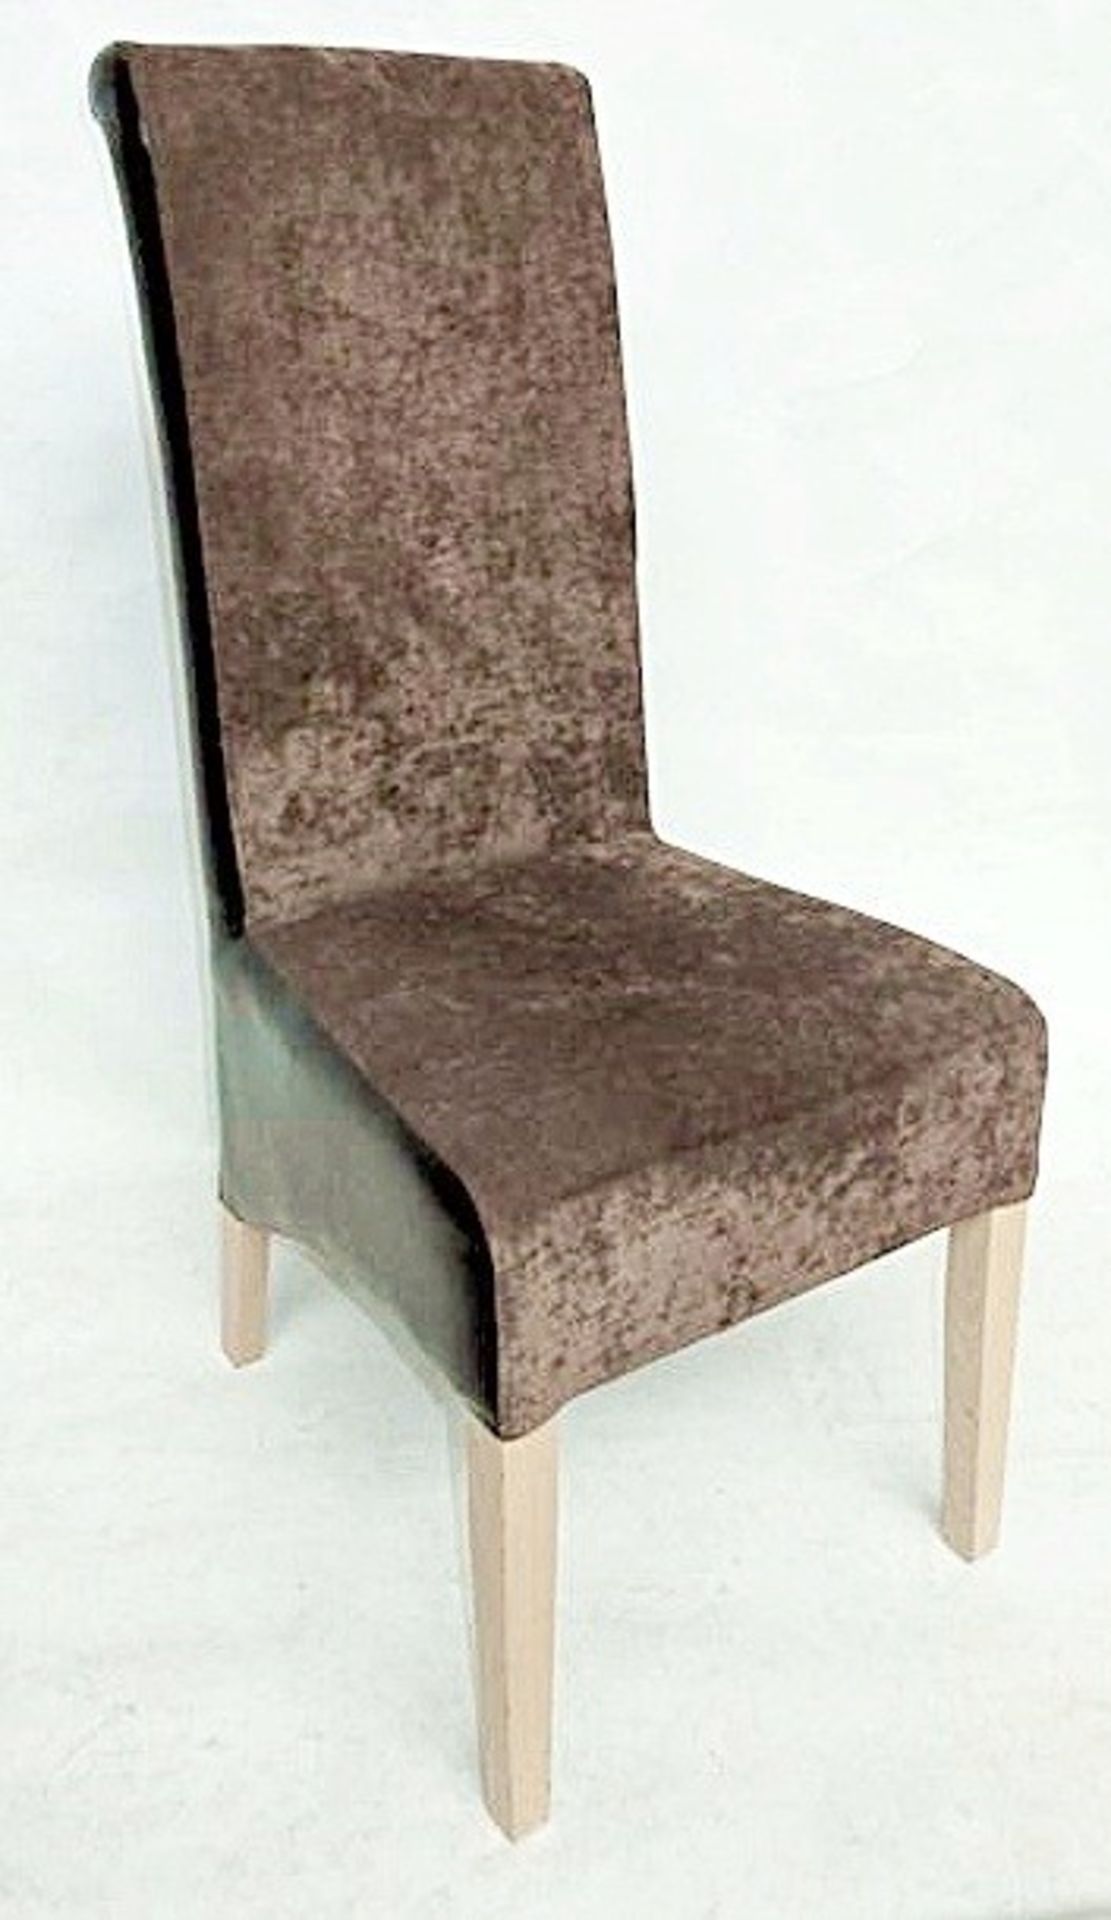 1 x Bespoke Highback Chair In A Rich Brown Chenile - Built And Upholstered By Professional British - Image 6 of 16